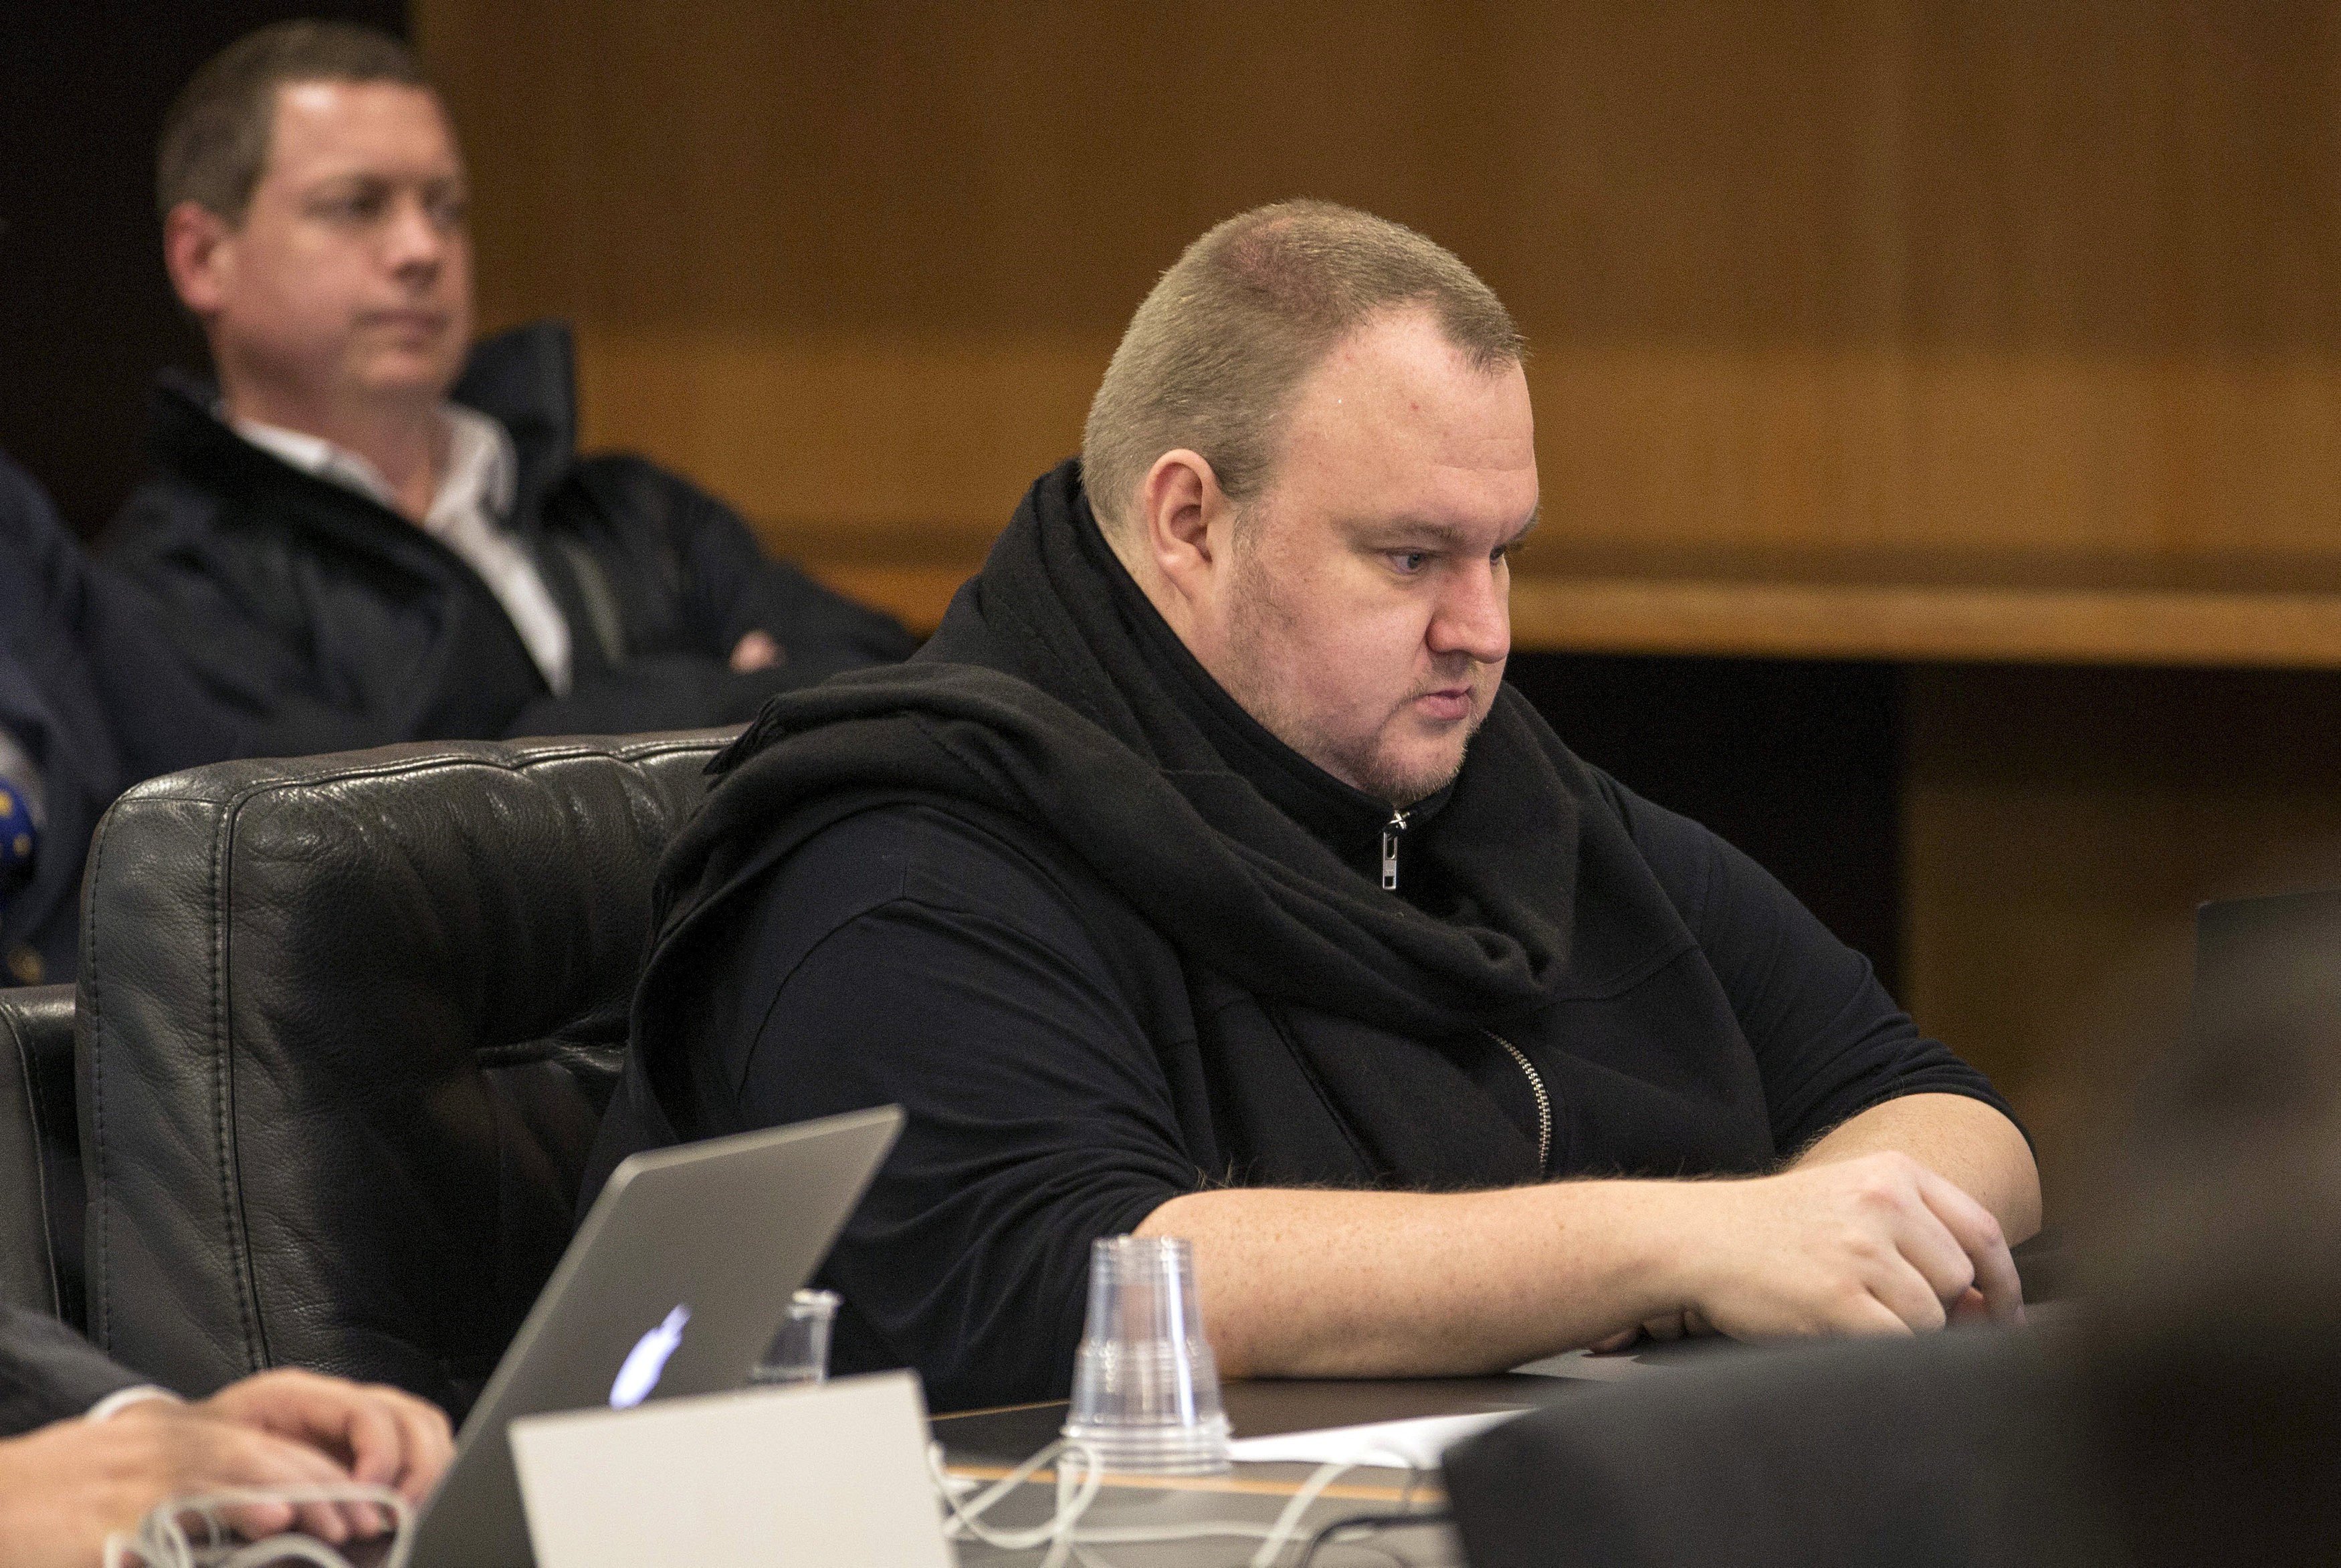 Kim Dotcom in court in New Zealand in 2015. Photo: Reuters